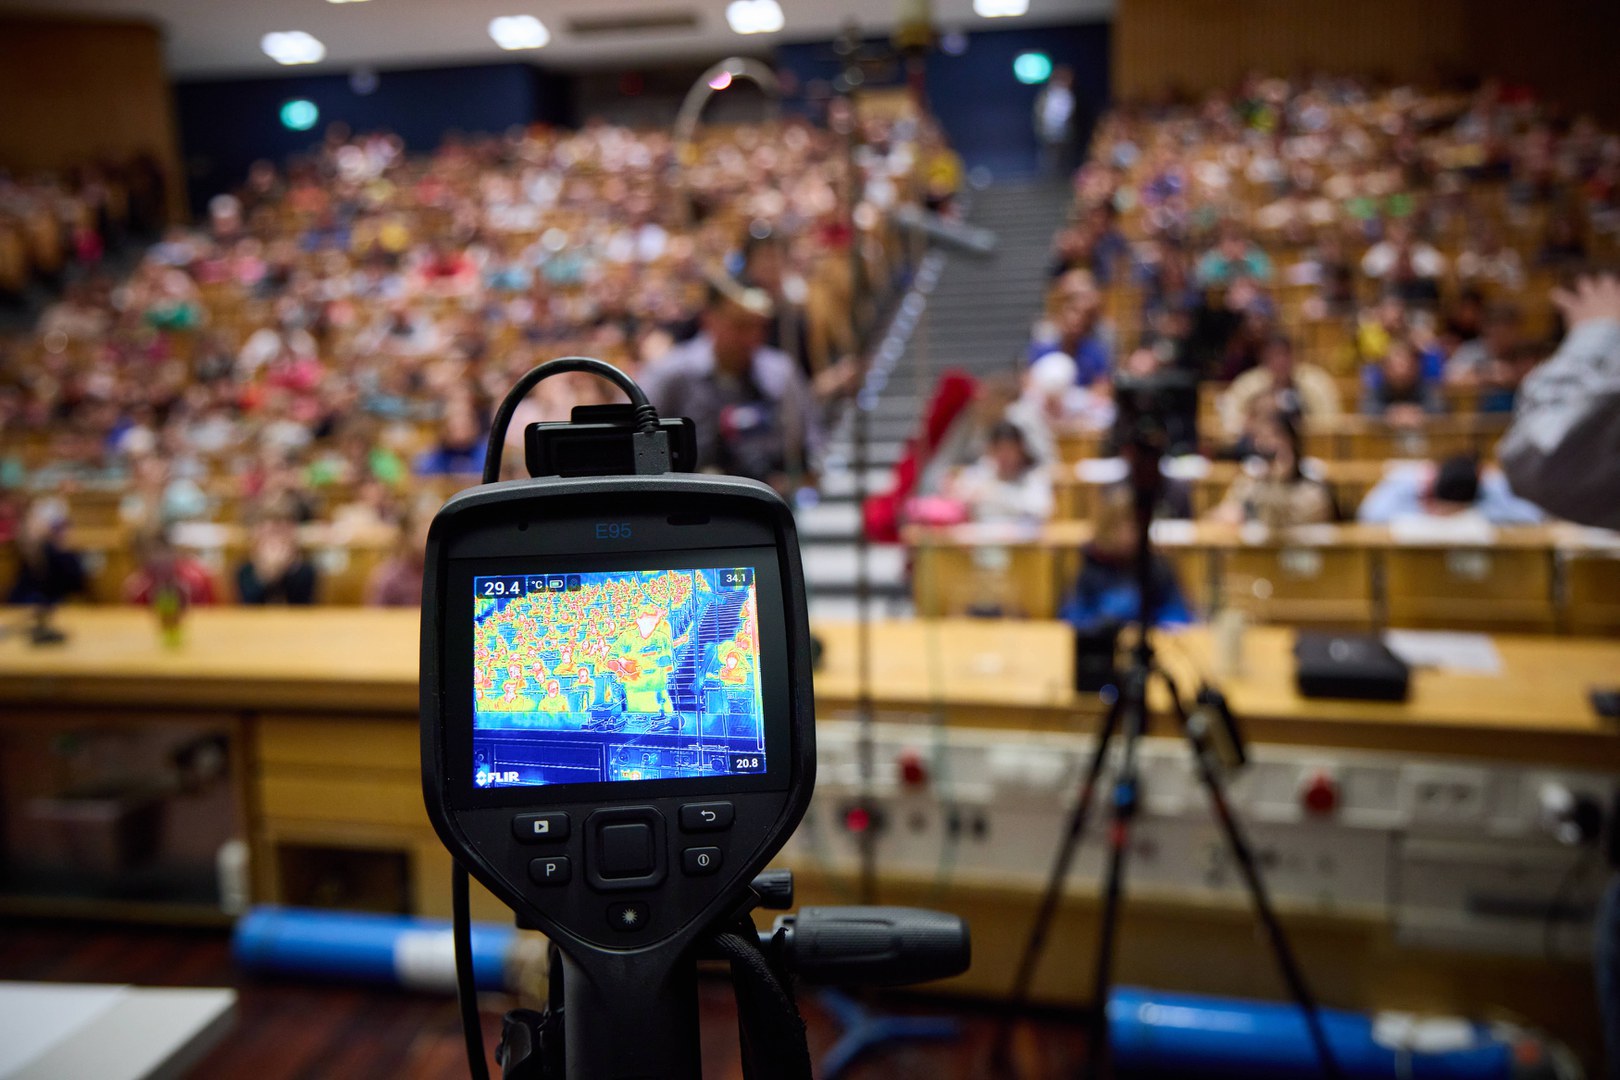 Experiment 3: Making heat "visible". The infrared radiation of the audience is recorded using a thermal imaging camera.